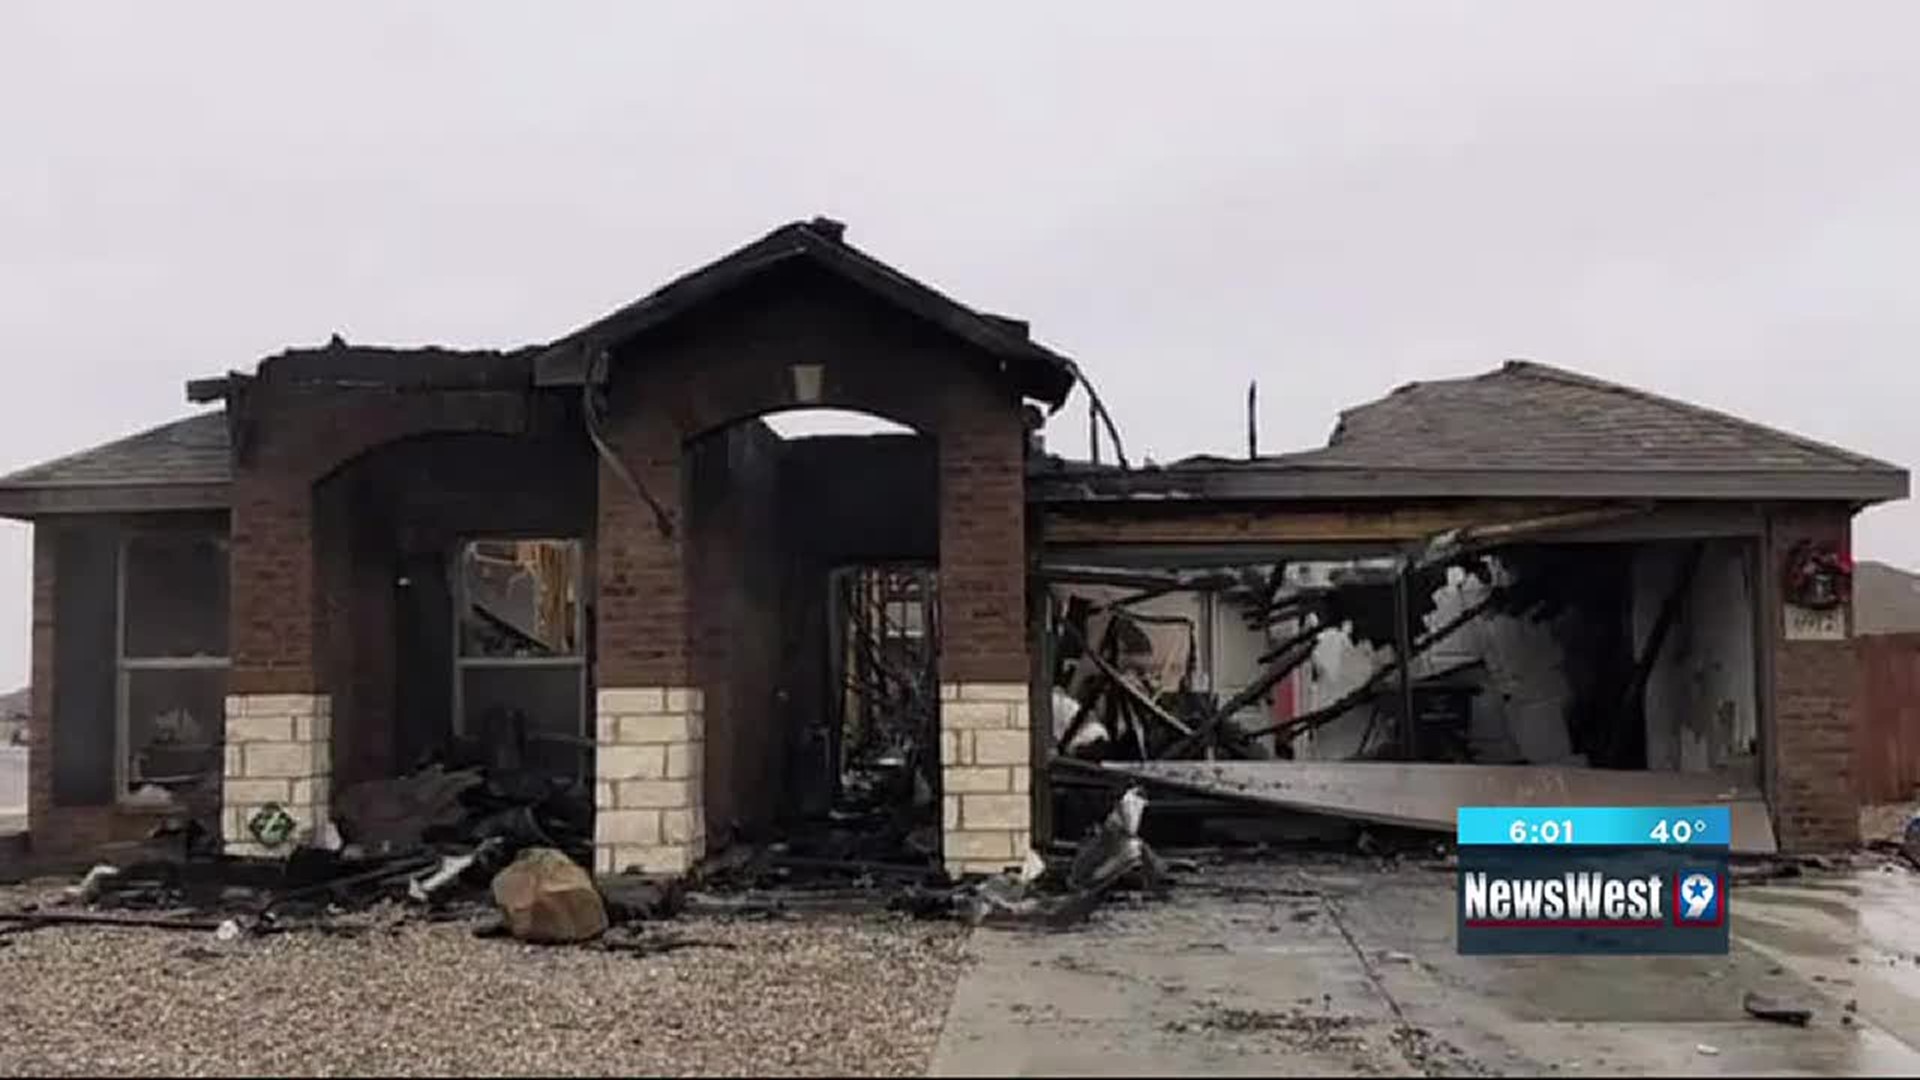 Midland residents, business collect donations for family who lost home in fire